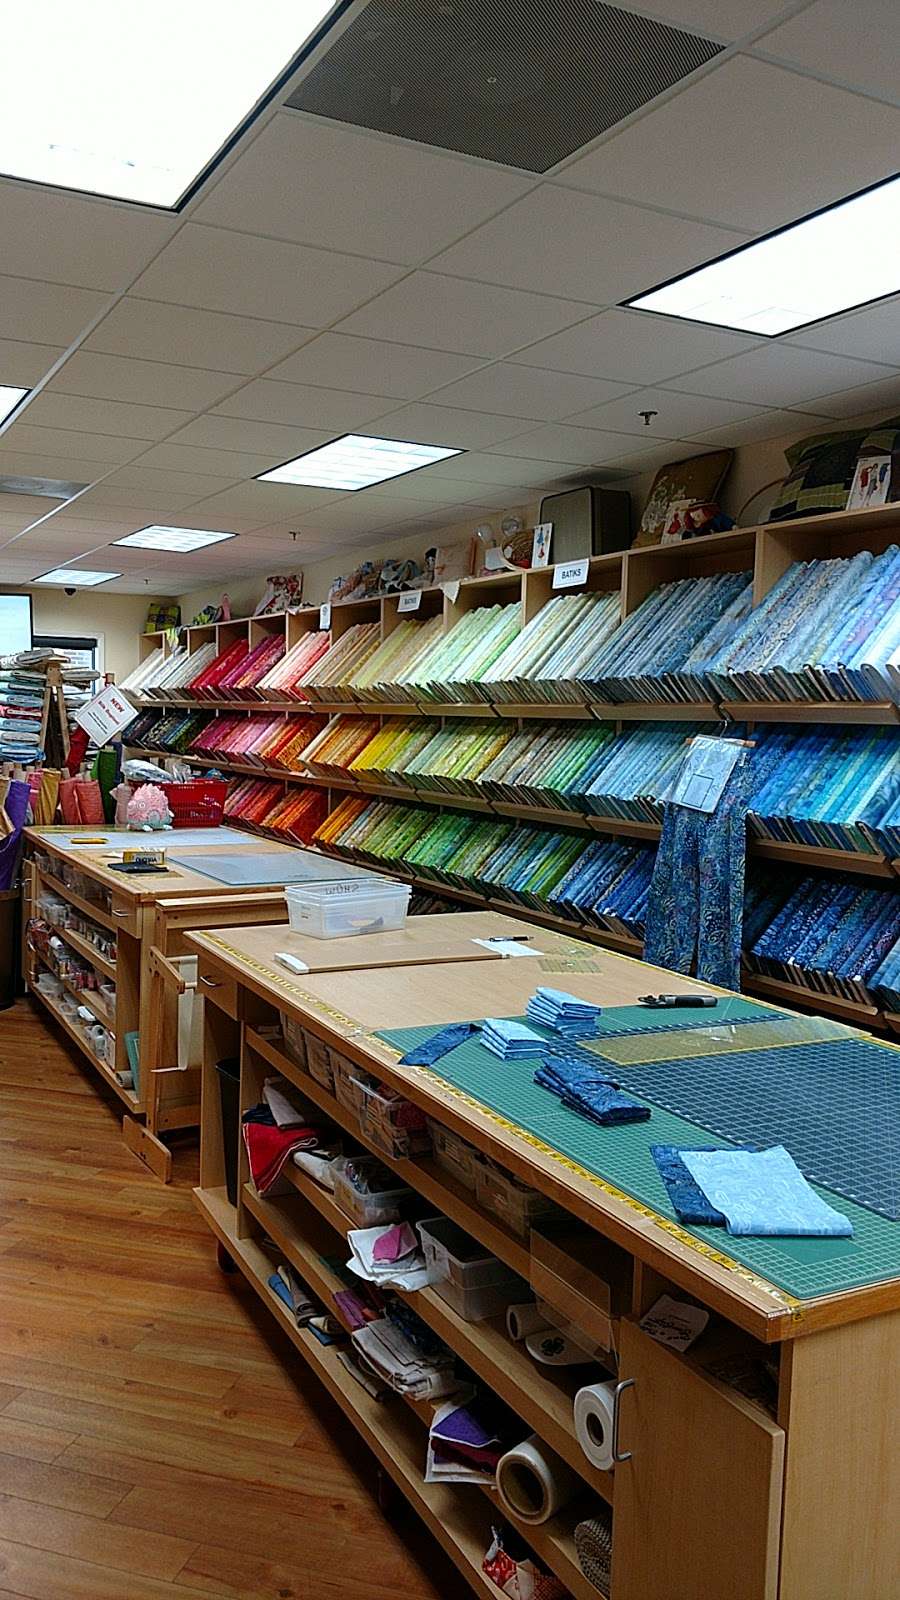 Linda Zs Sewing Center | 1216 E Central Rd, Arlington Heights, IL 60005, USA | Phone: (847) 394-4590